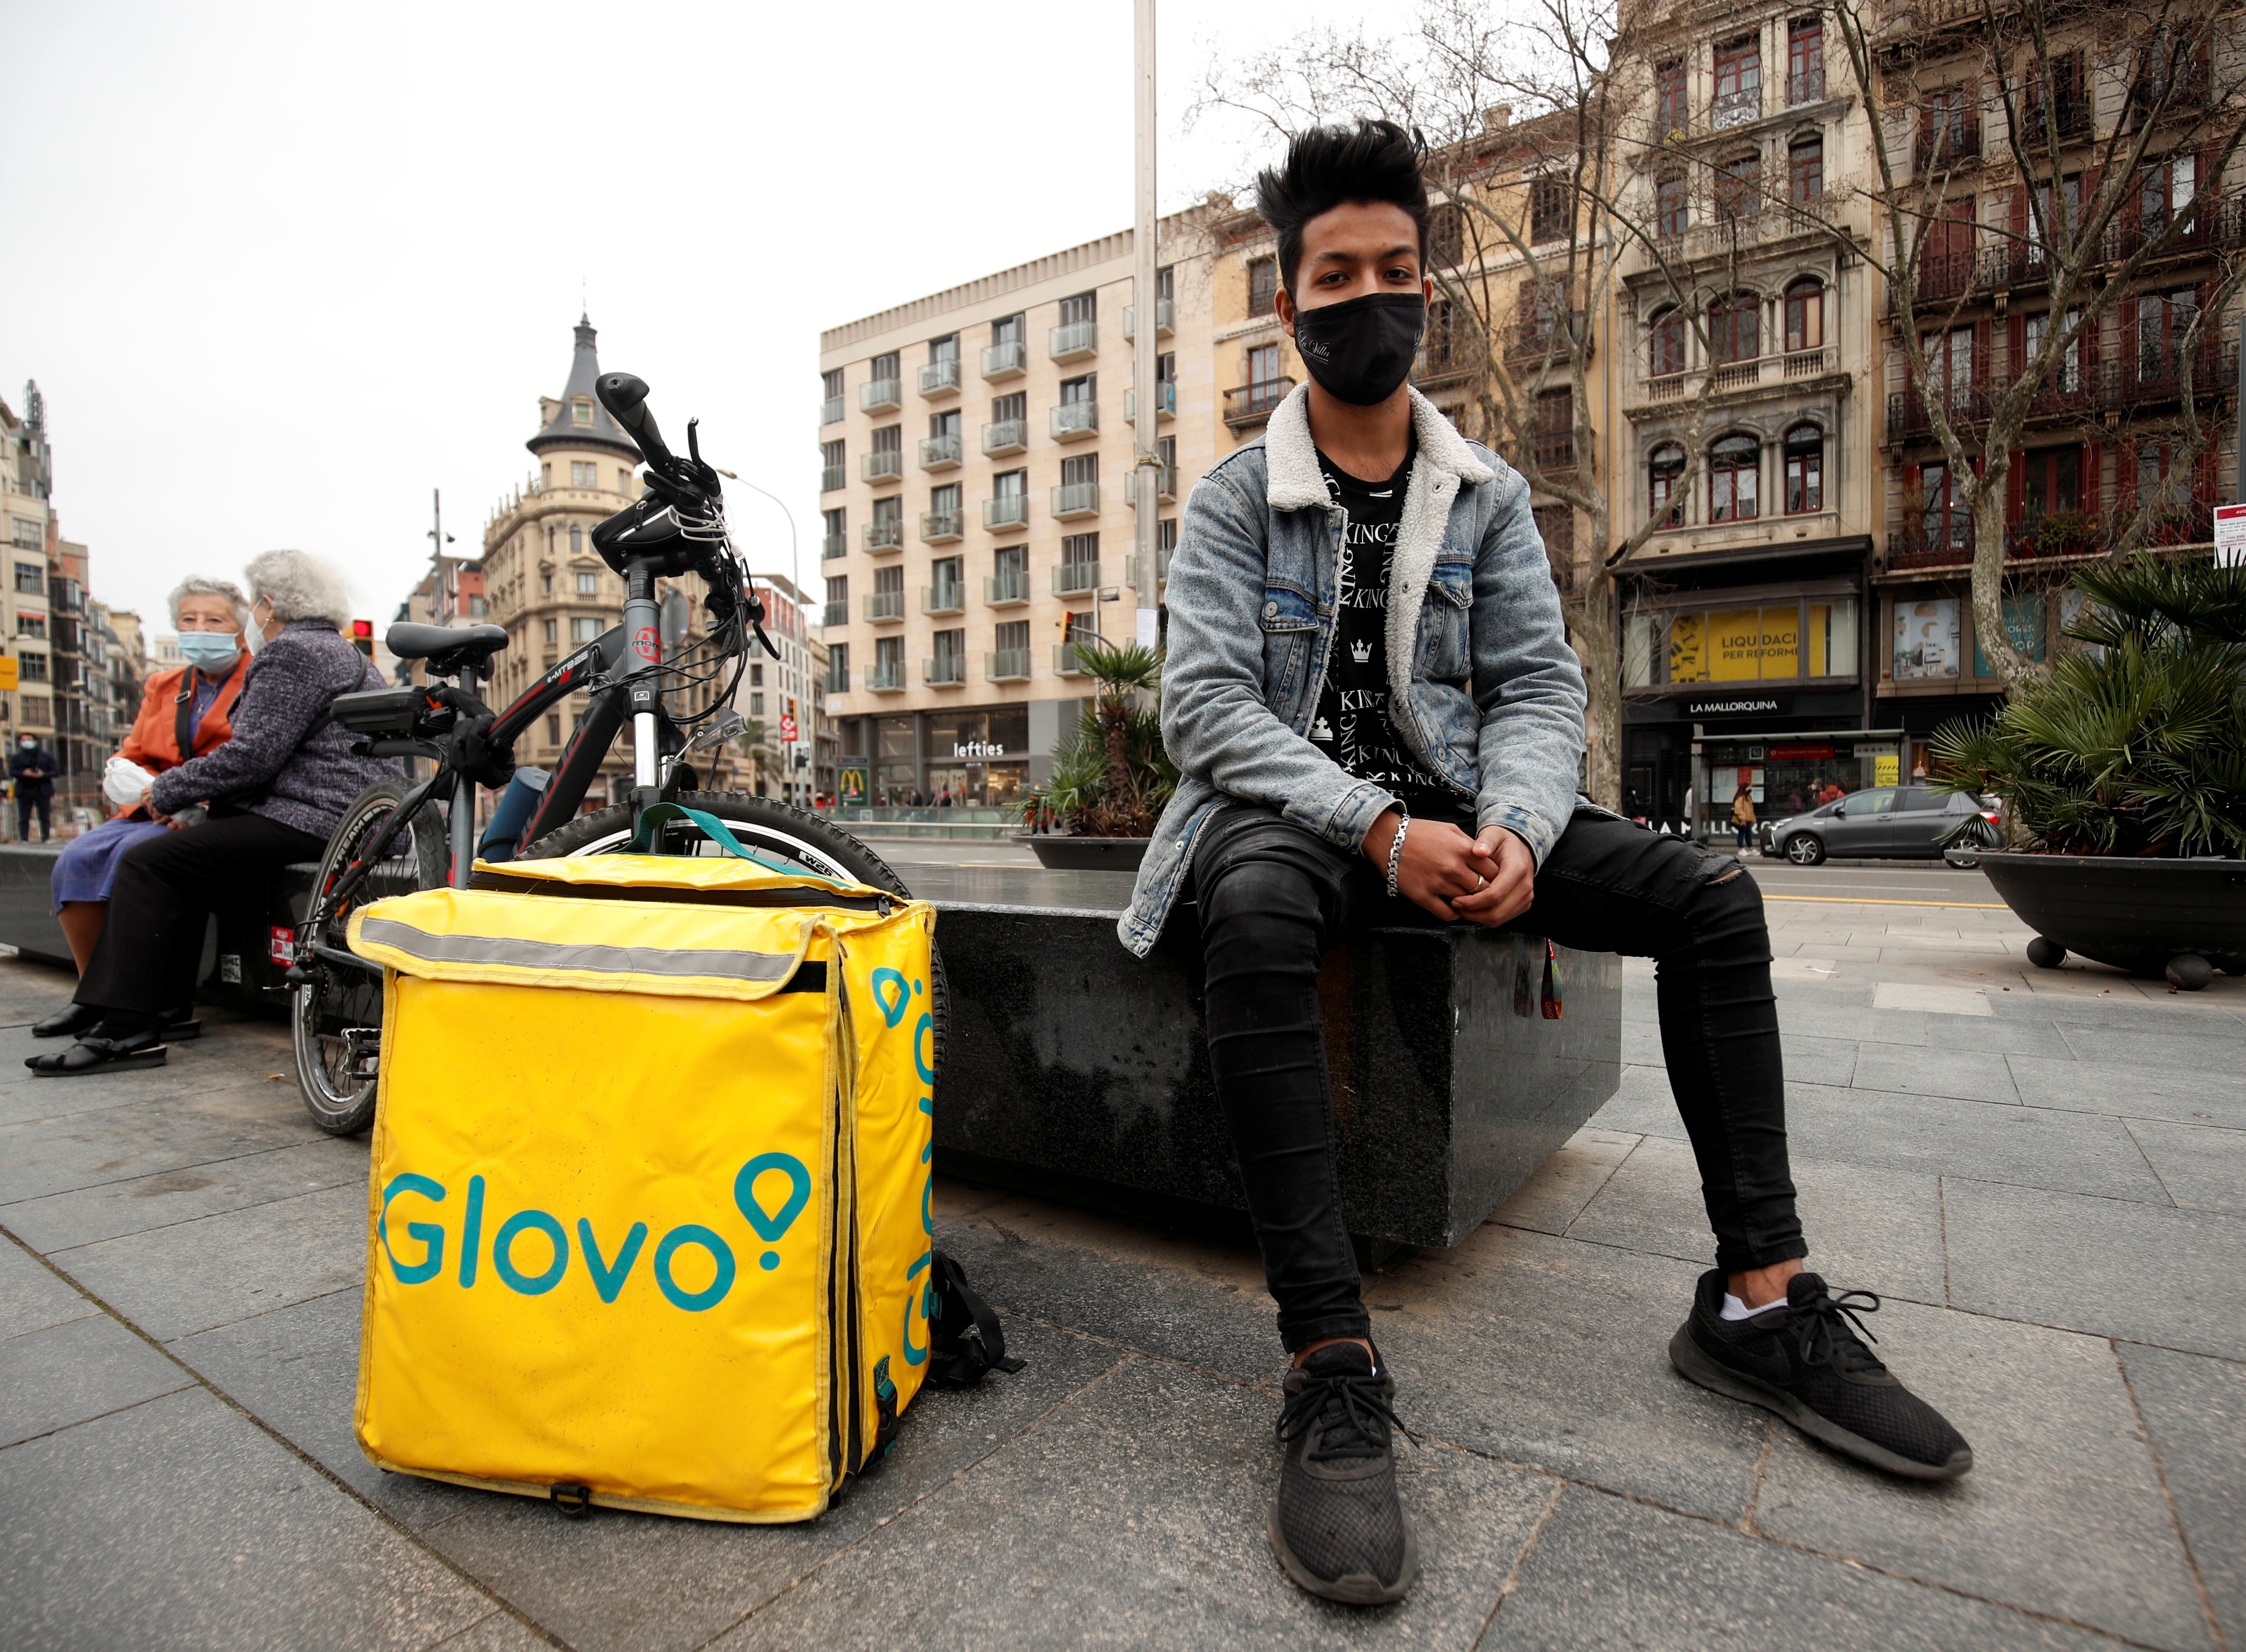 Delivery rider Manzurul Hoque from Bangladesh poses during an interview at Universitat square in Barcelona